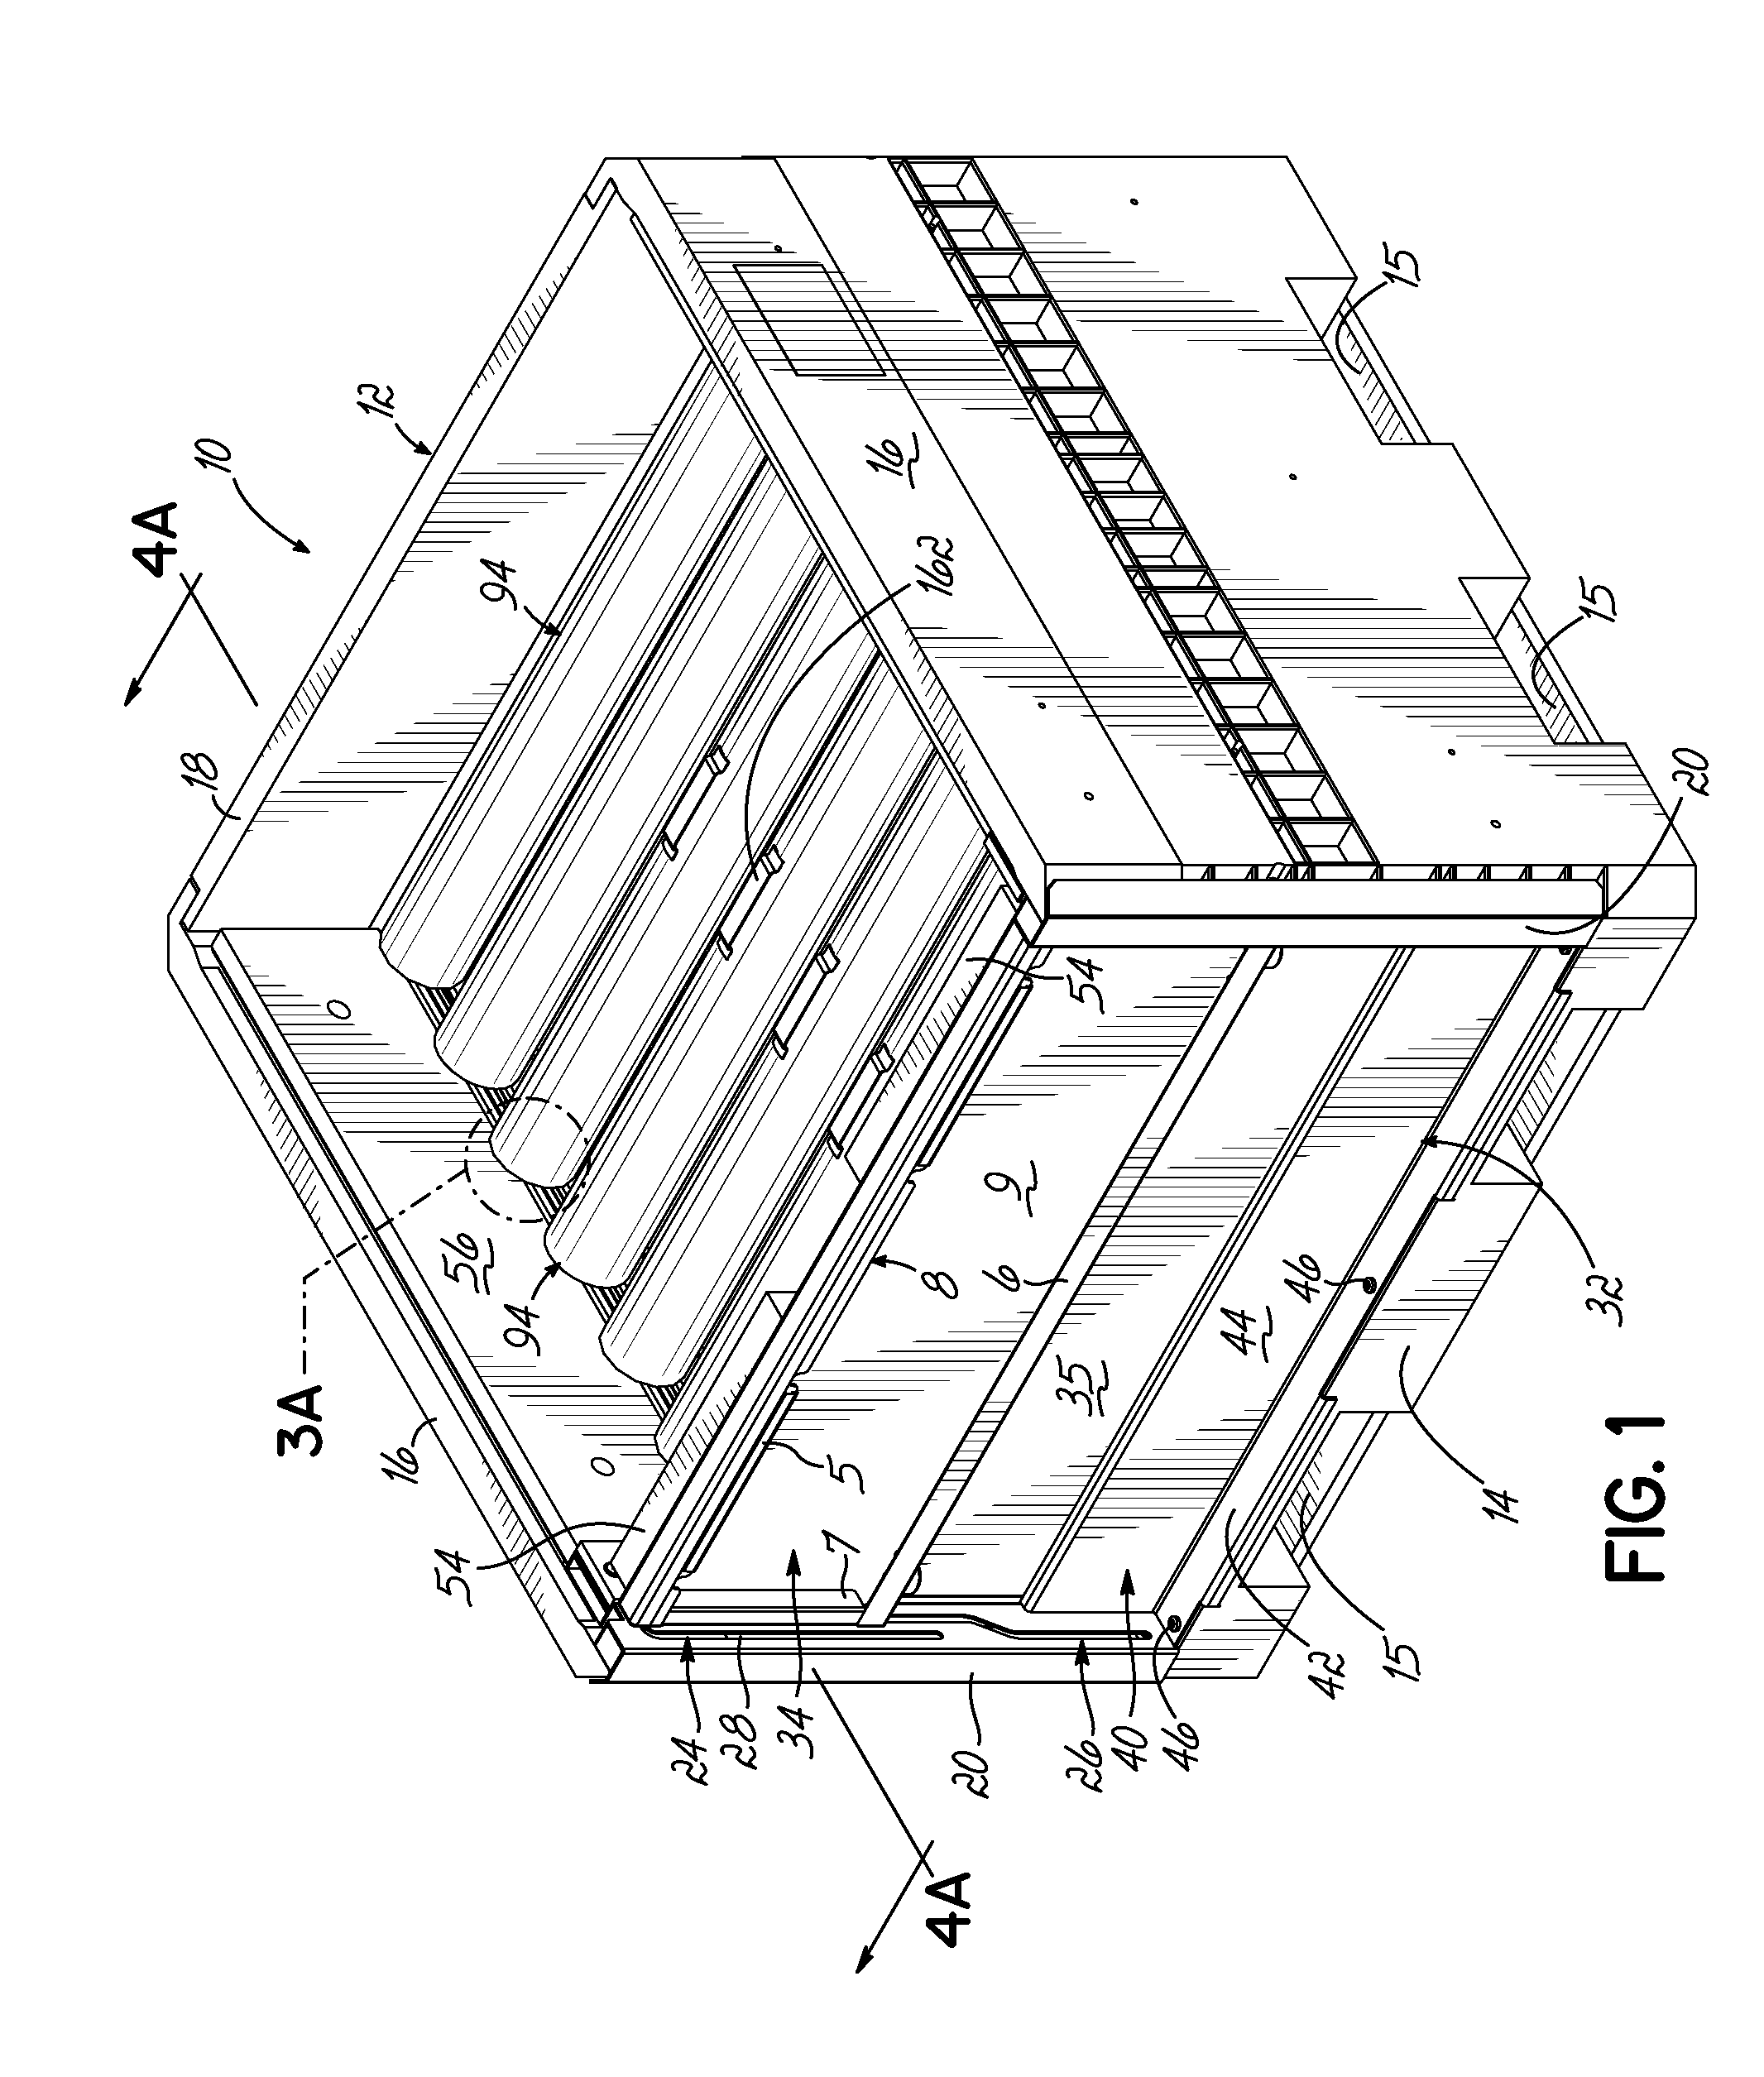 Container Having Padded Dunnage Supports and L-Shaped Tracks